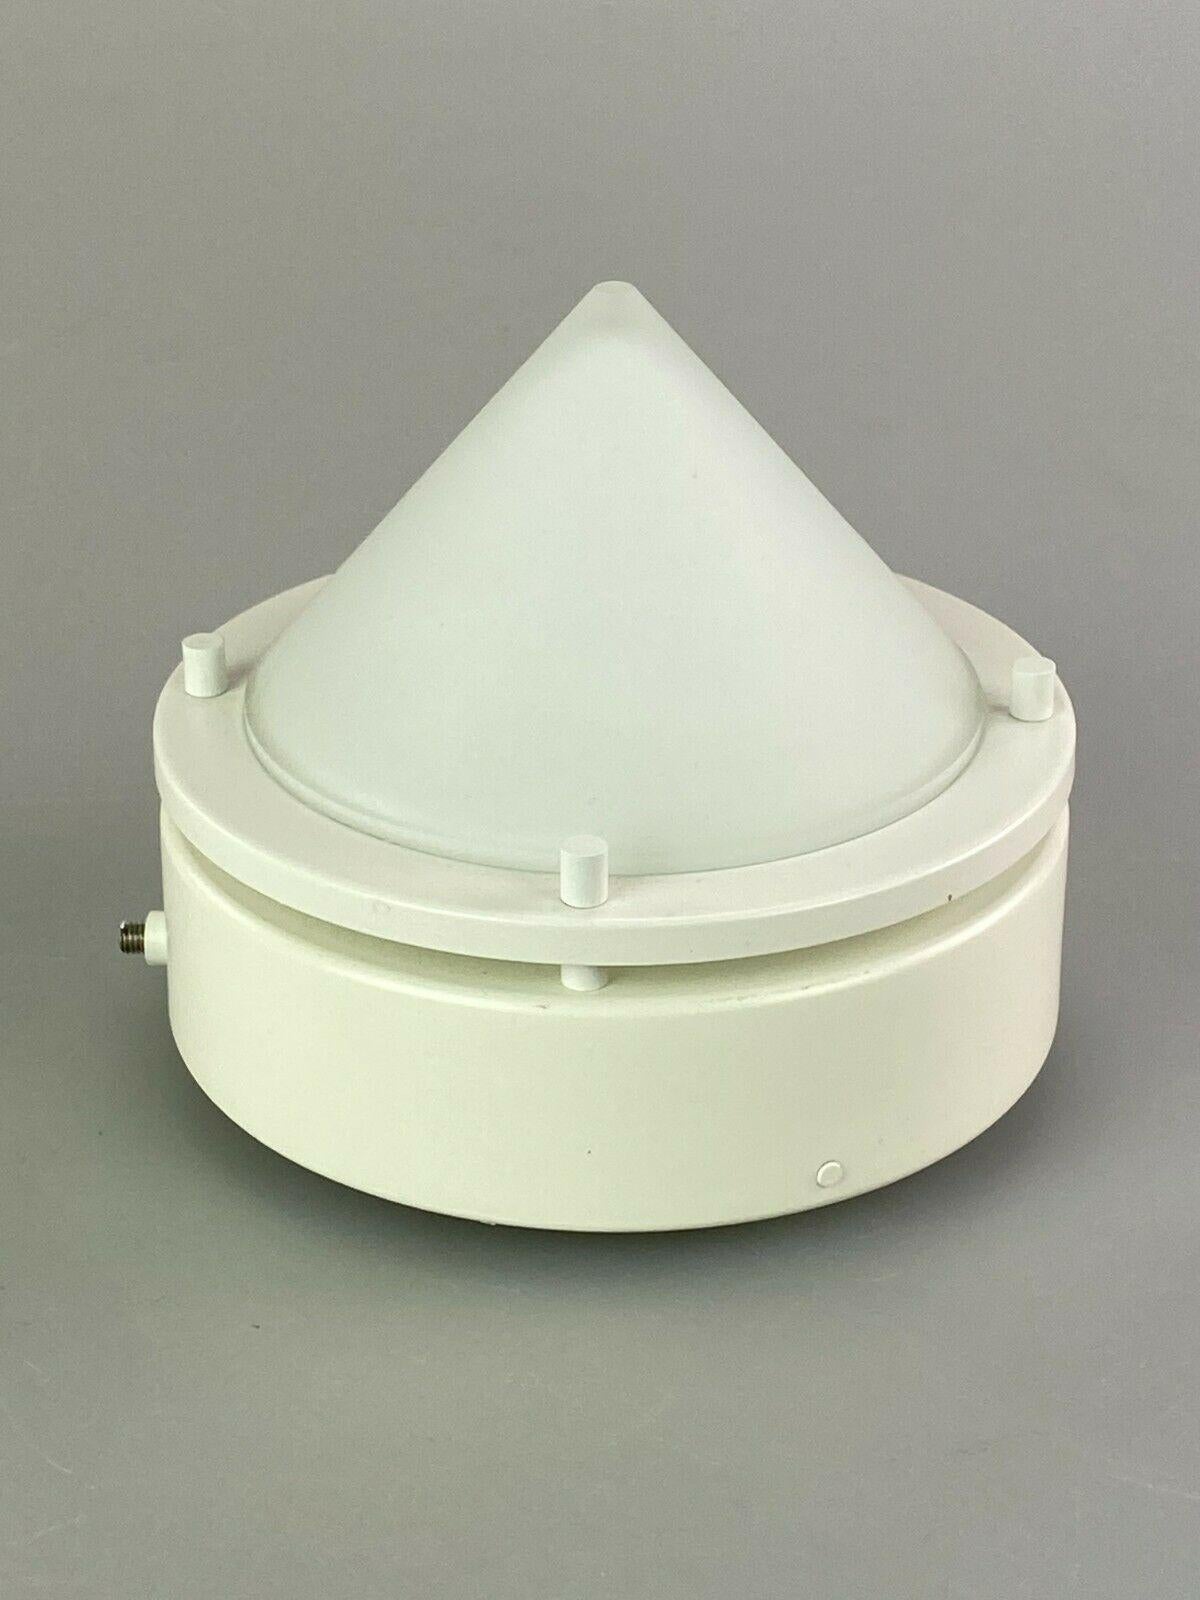 60s 70s Lamp light wall lamp Limburg Plafoniere Space Age Design 60s.

Object: wall lamp

Manufacturer: Glashütte Limburg 4074

Condition: good

Age: around 1960-1970

Dimensions:

Diameter = 13cm
Height = 11cm

Other notes:

The